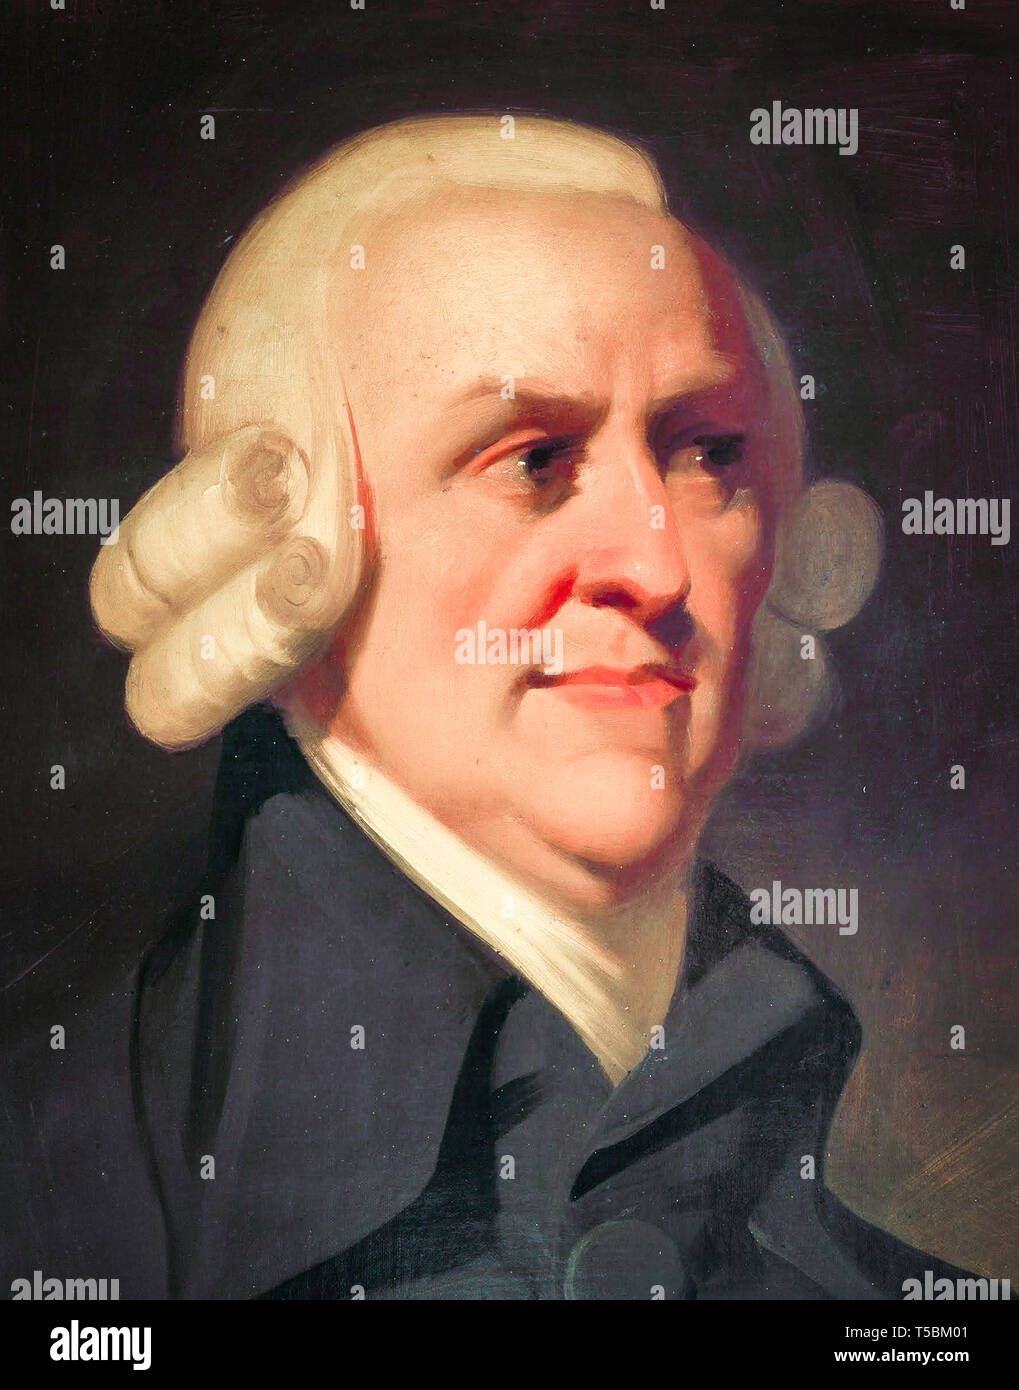 Adam Smith (1723-1790), portrait painting, detail from The Muir portrait, c. 1800 Stock Photo